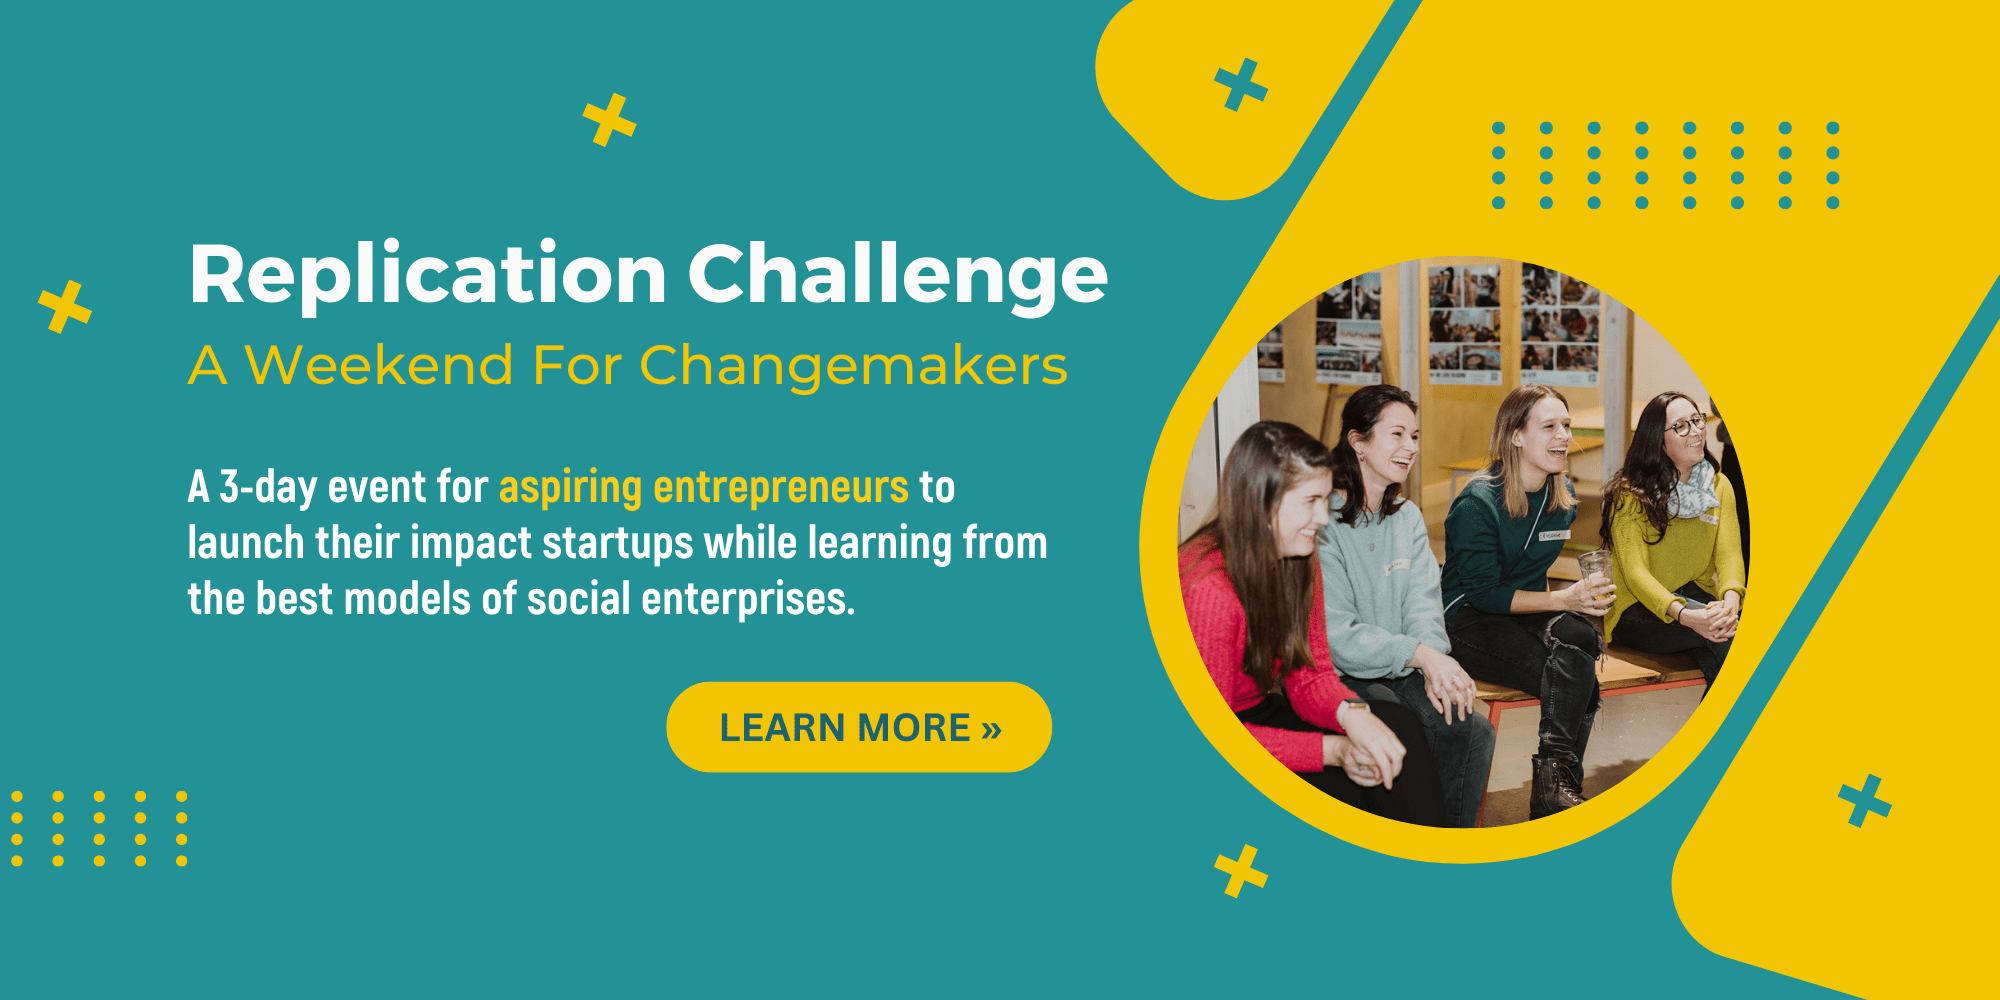 Replication Challenge:<br />
A 3-day event for aspiring entrepreneurs to launch their impact startups while learning from the best models of social enterprises.